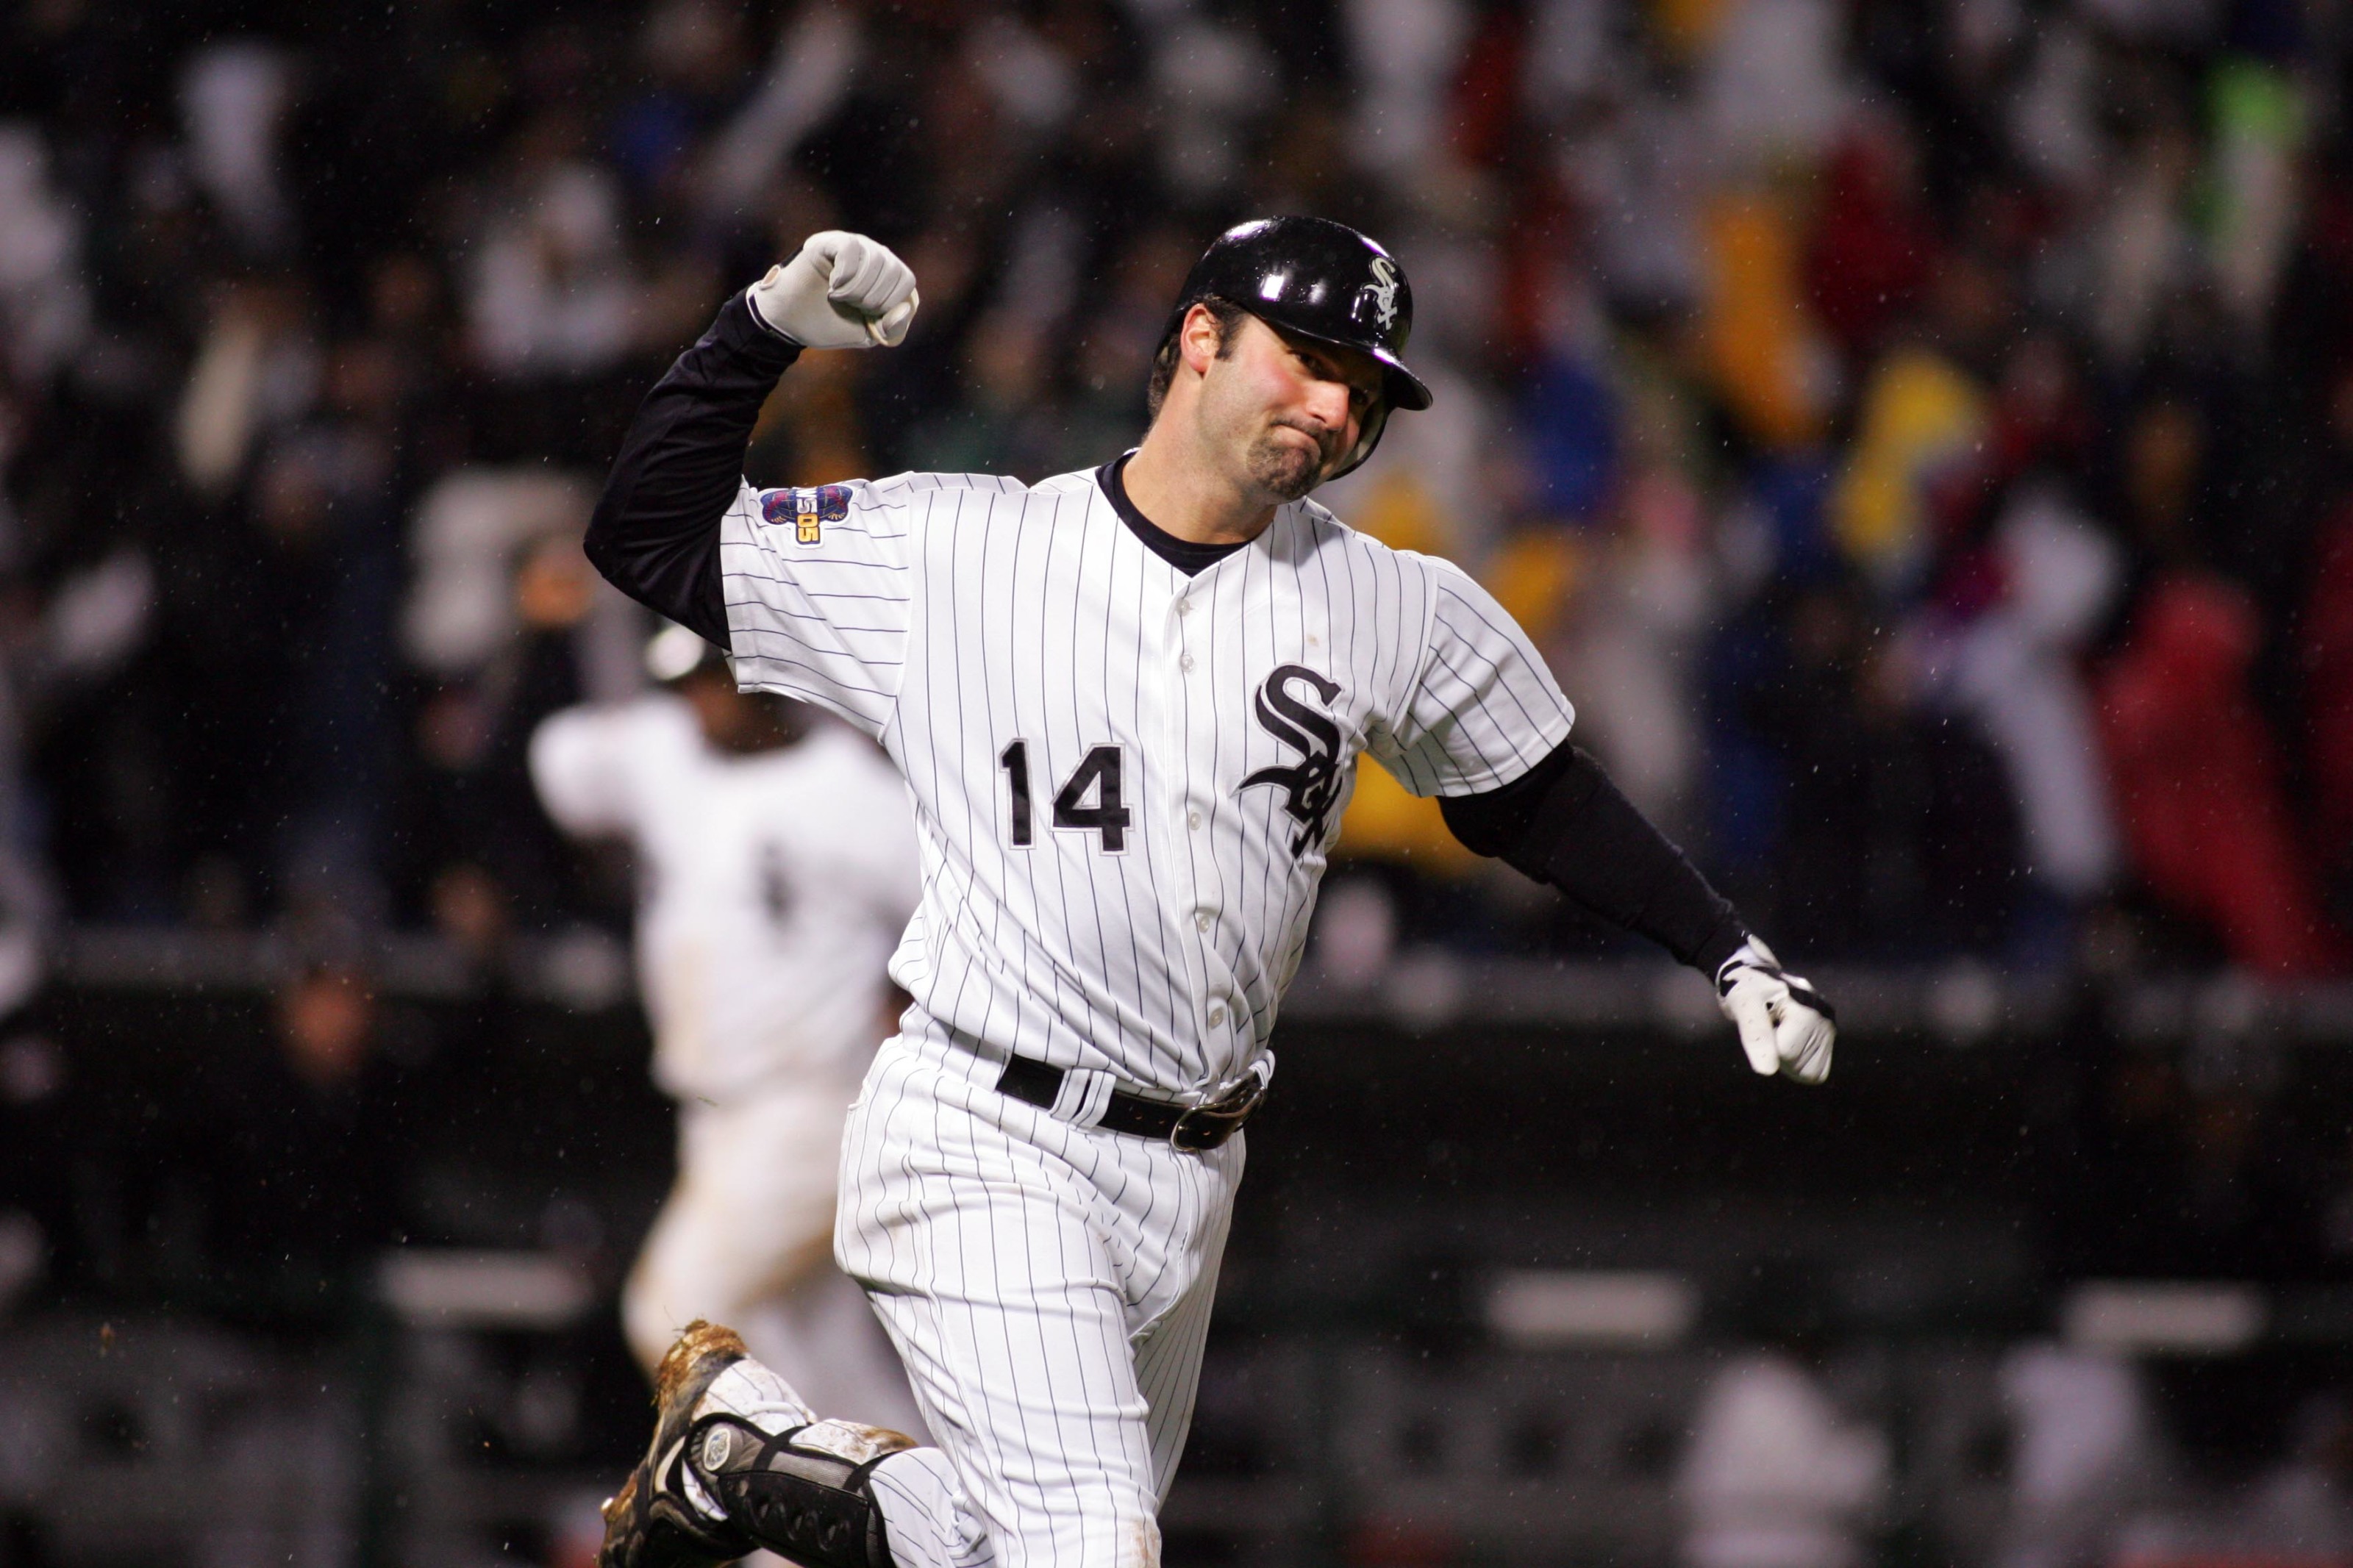 Chicago White Sox: 2005 postseason record stands the test of time